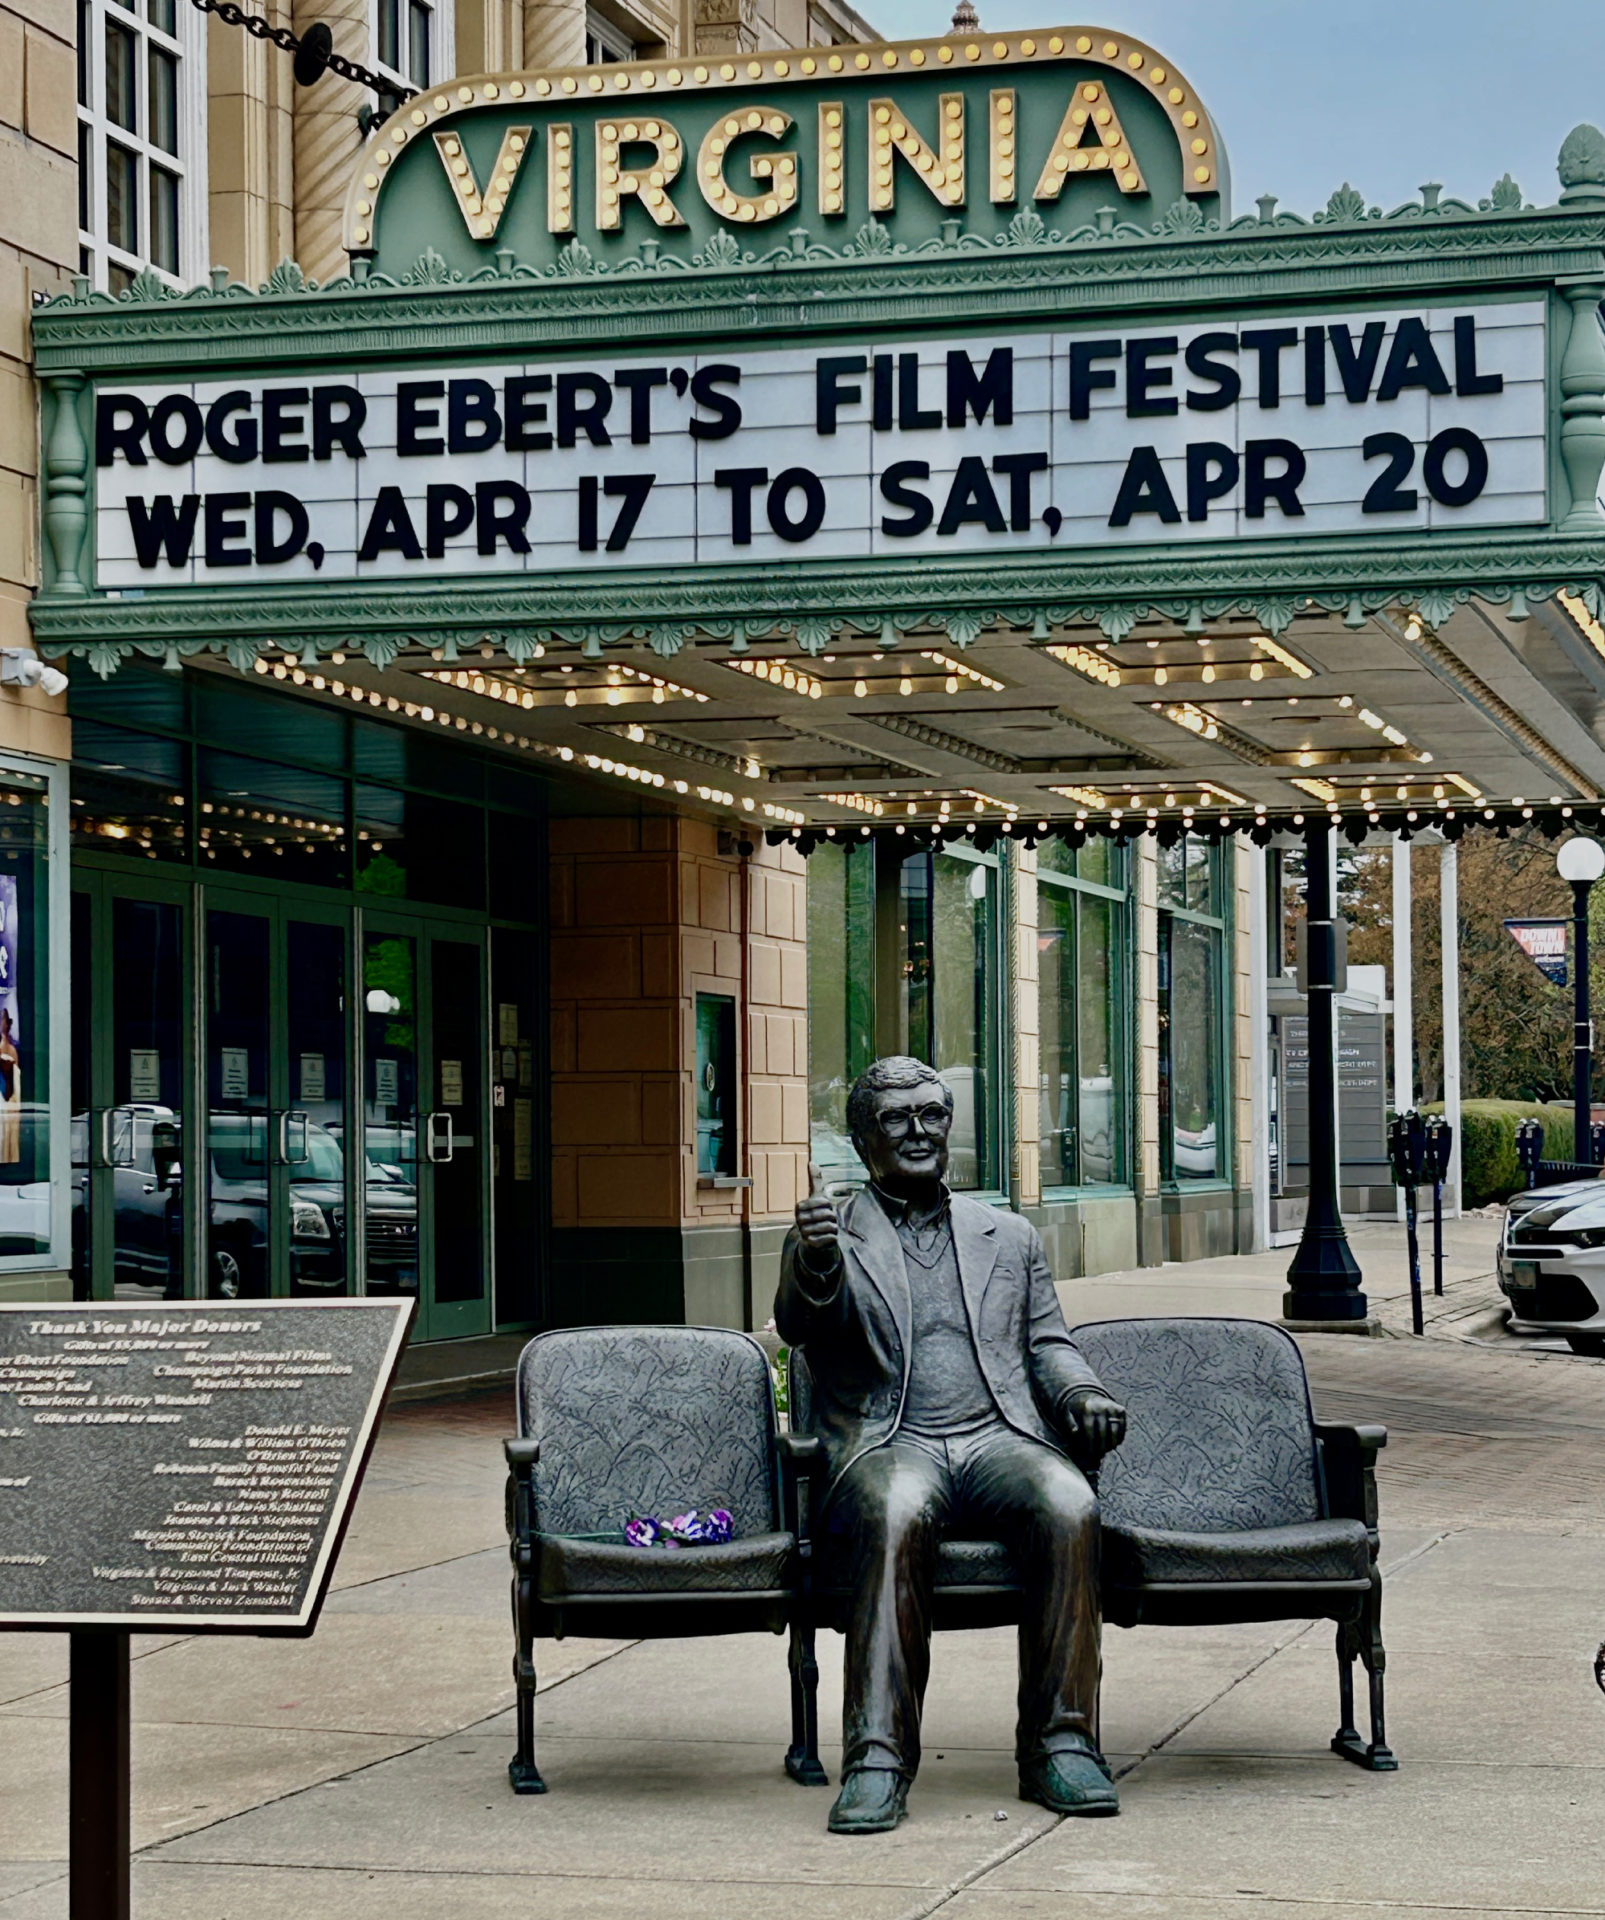 Photo of green film marquee with white background. The theatre is the Virginia. Text on the marquee reads Roger Ebert's Film Festival Wednesday April 17 to Saturday, April 20. A bronze statue of a man seated with his thumbs up is in front of the theatre on the sidewalk.